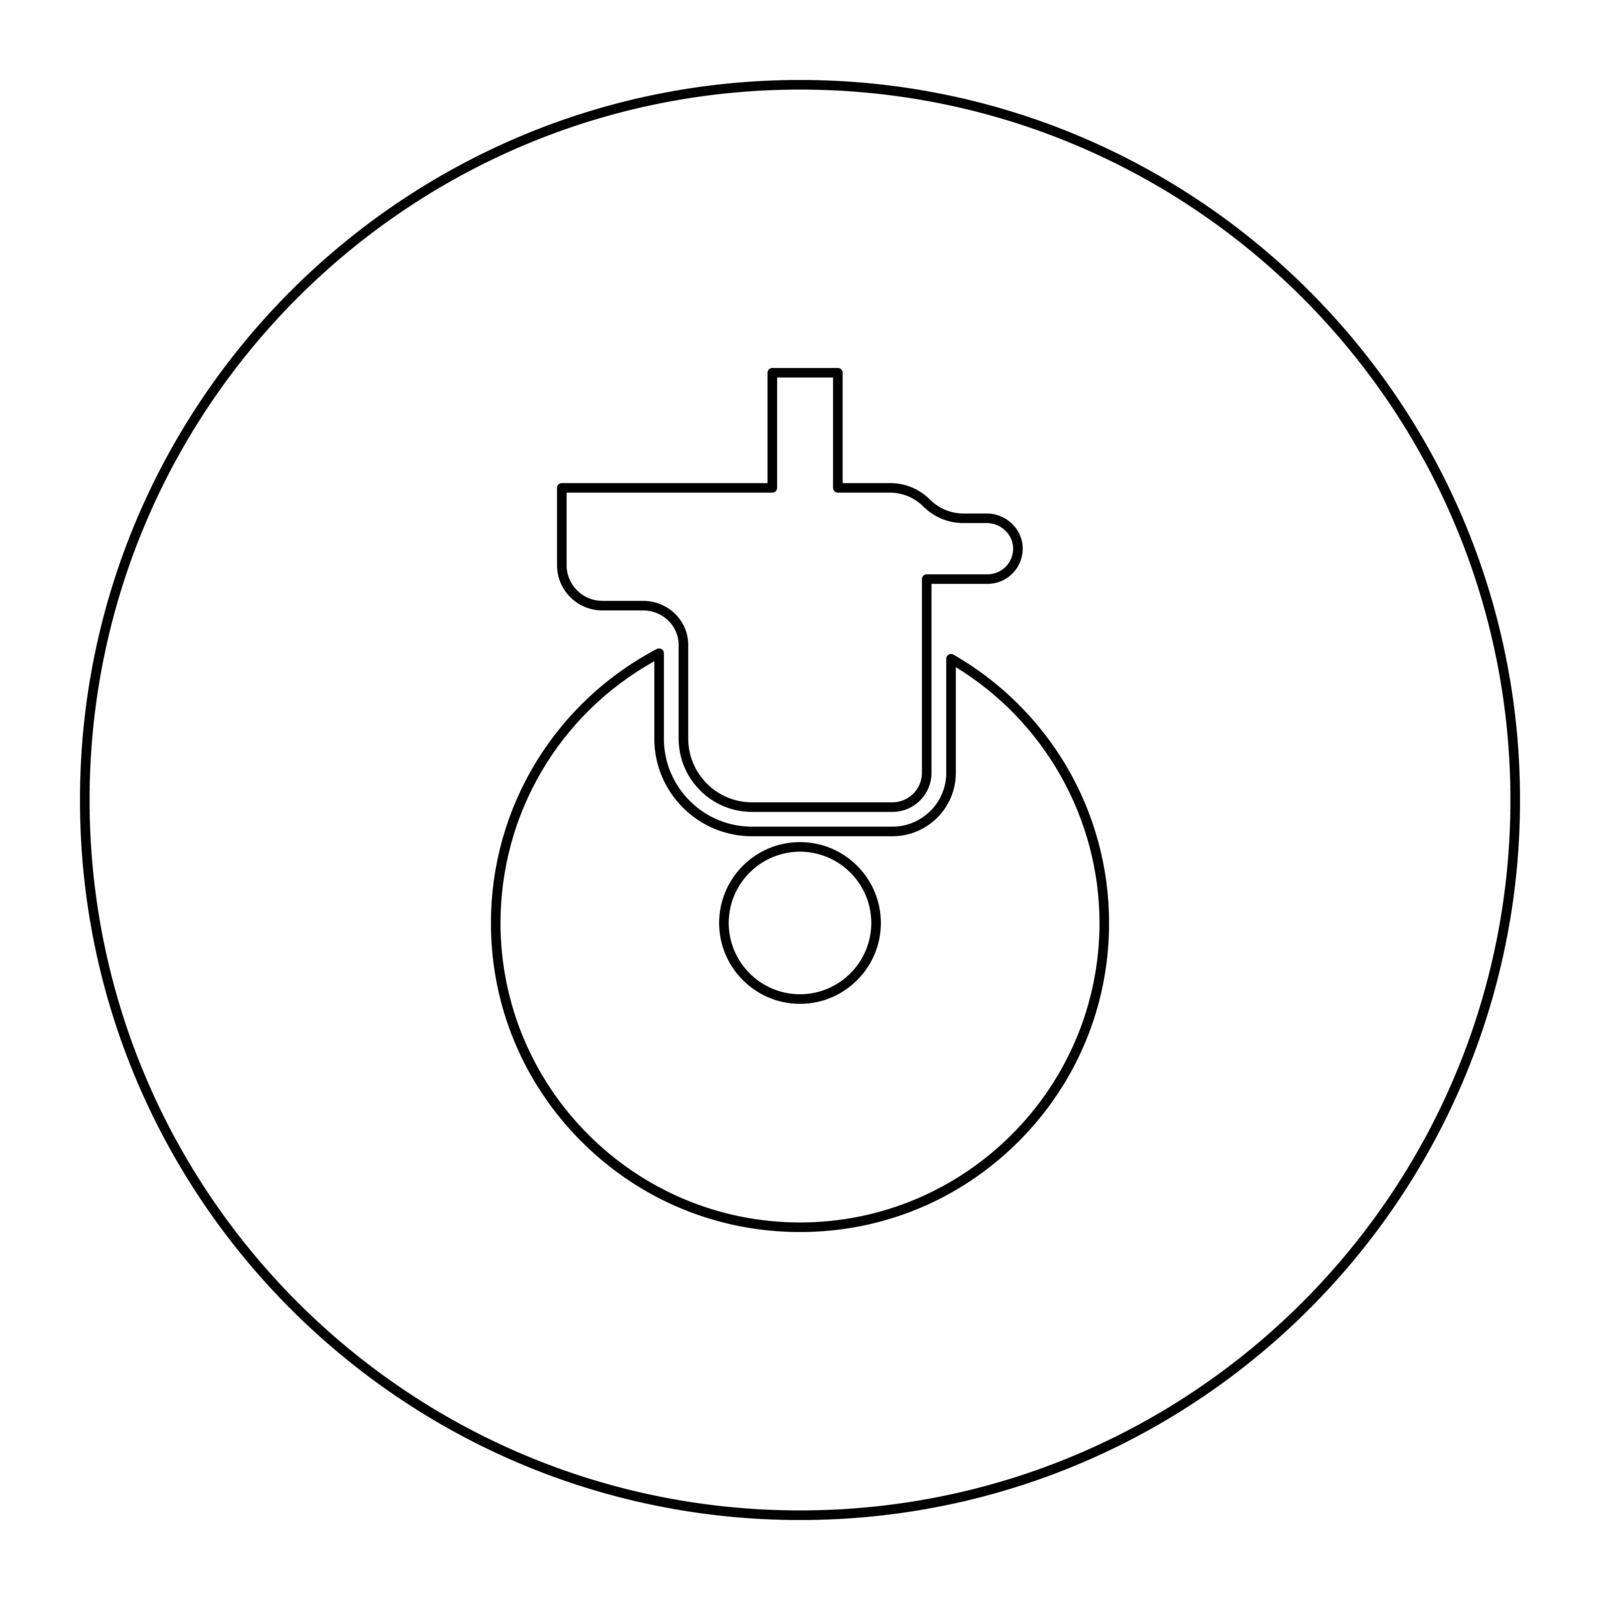 Wheel for furniture caster cart icon in circle round black color vector illustration image outline contour line thin style simple